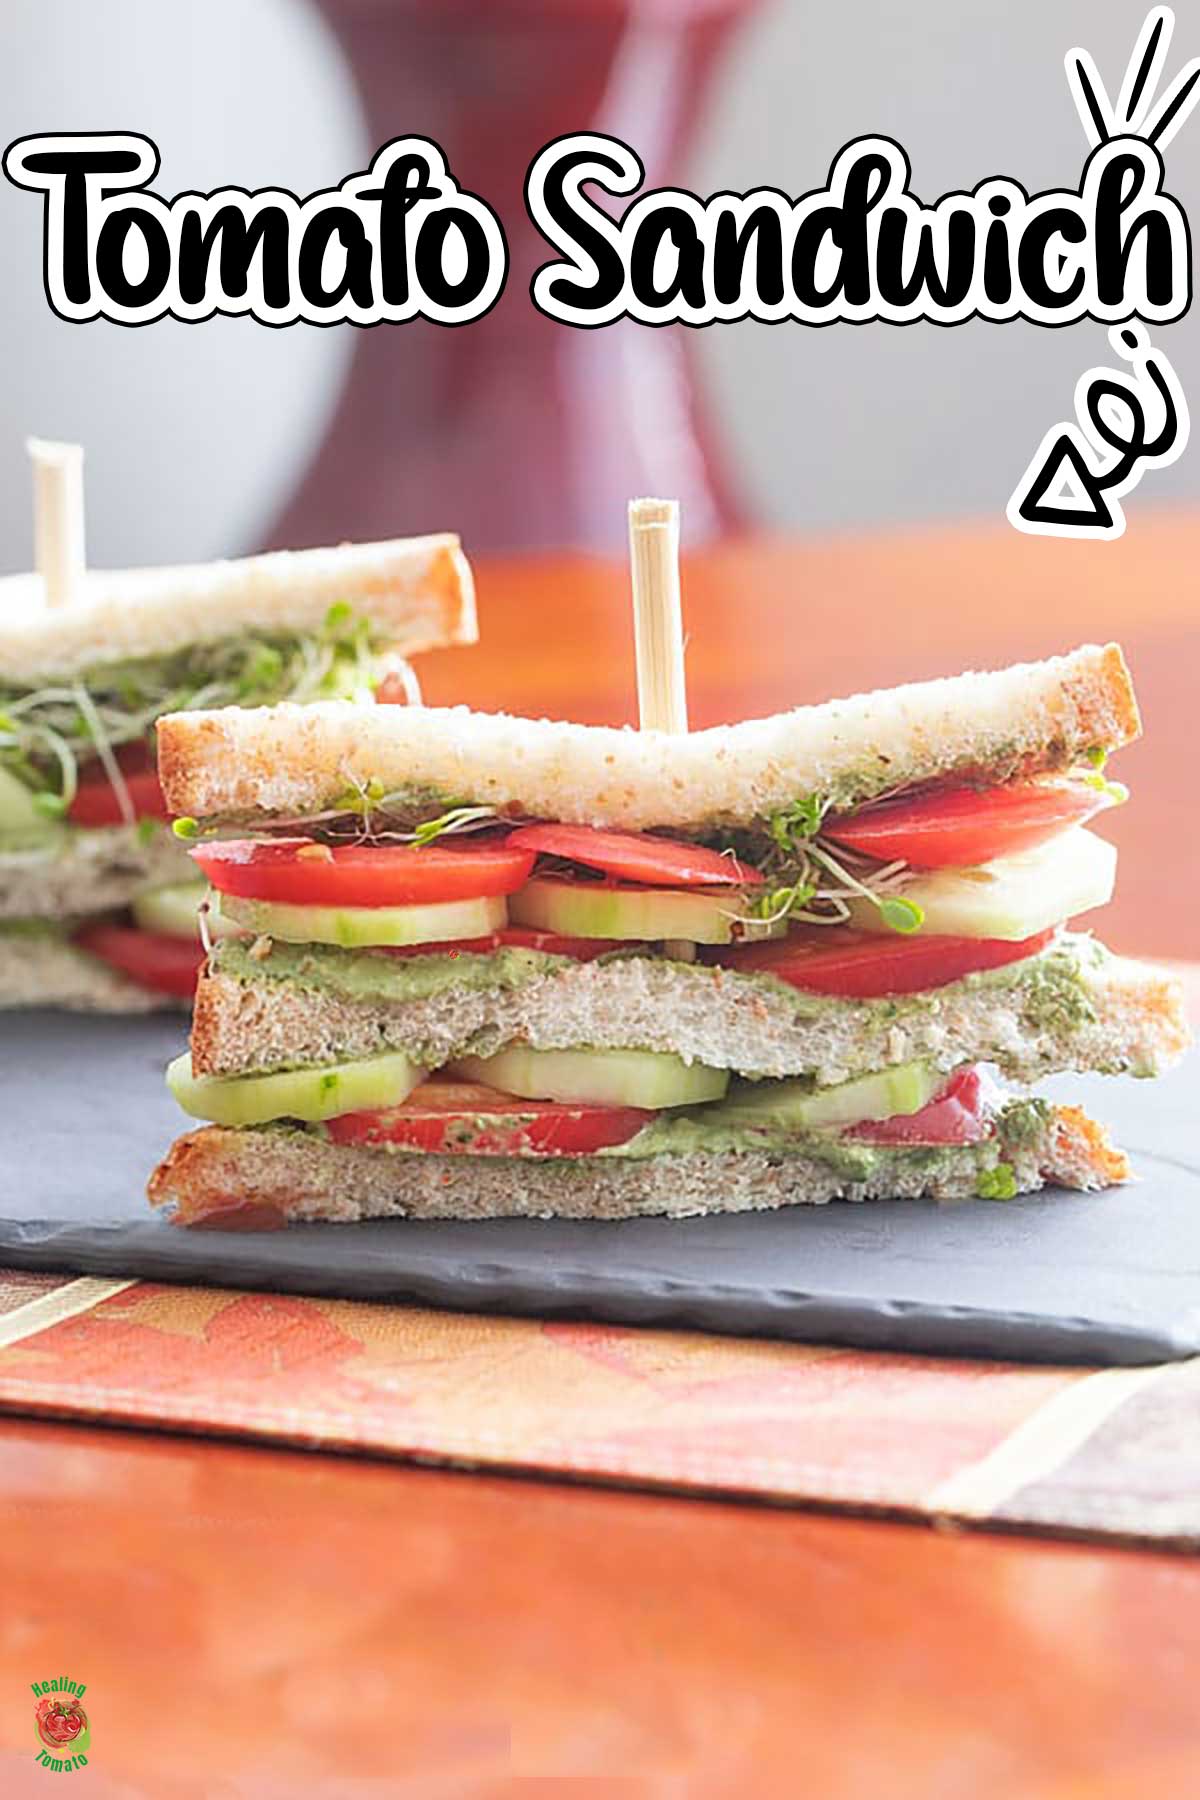 Front view of a double decker tomato sandwich with layers of tomato, cucumber, pesto spread and broccoli sprouts